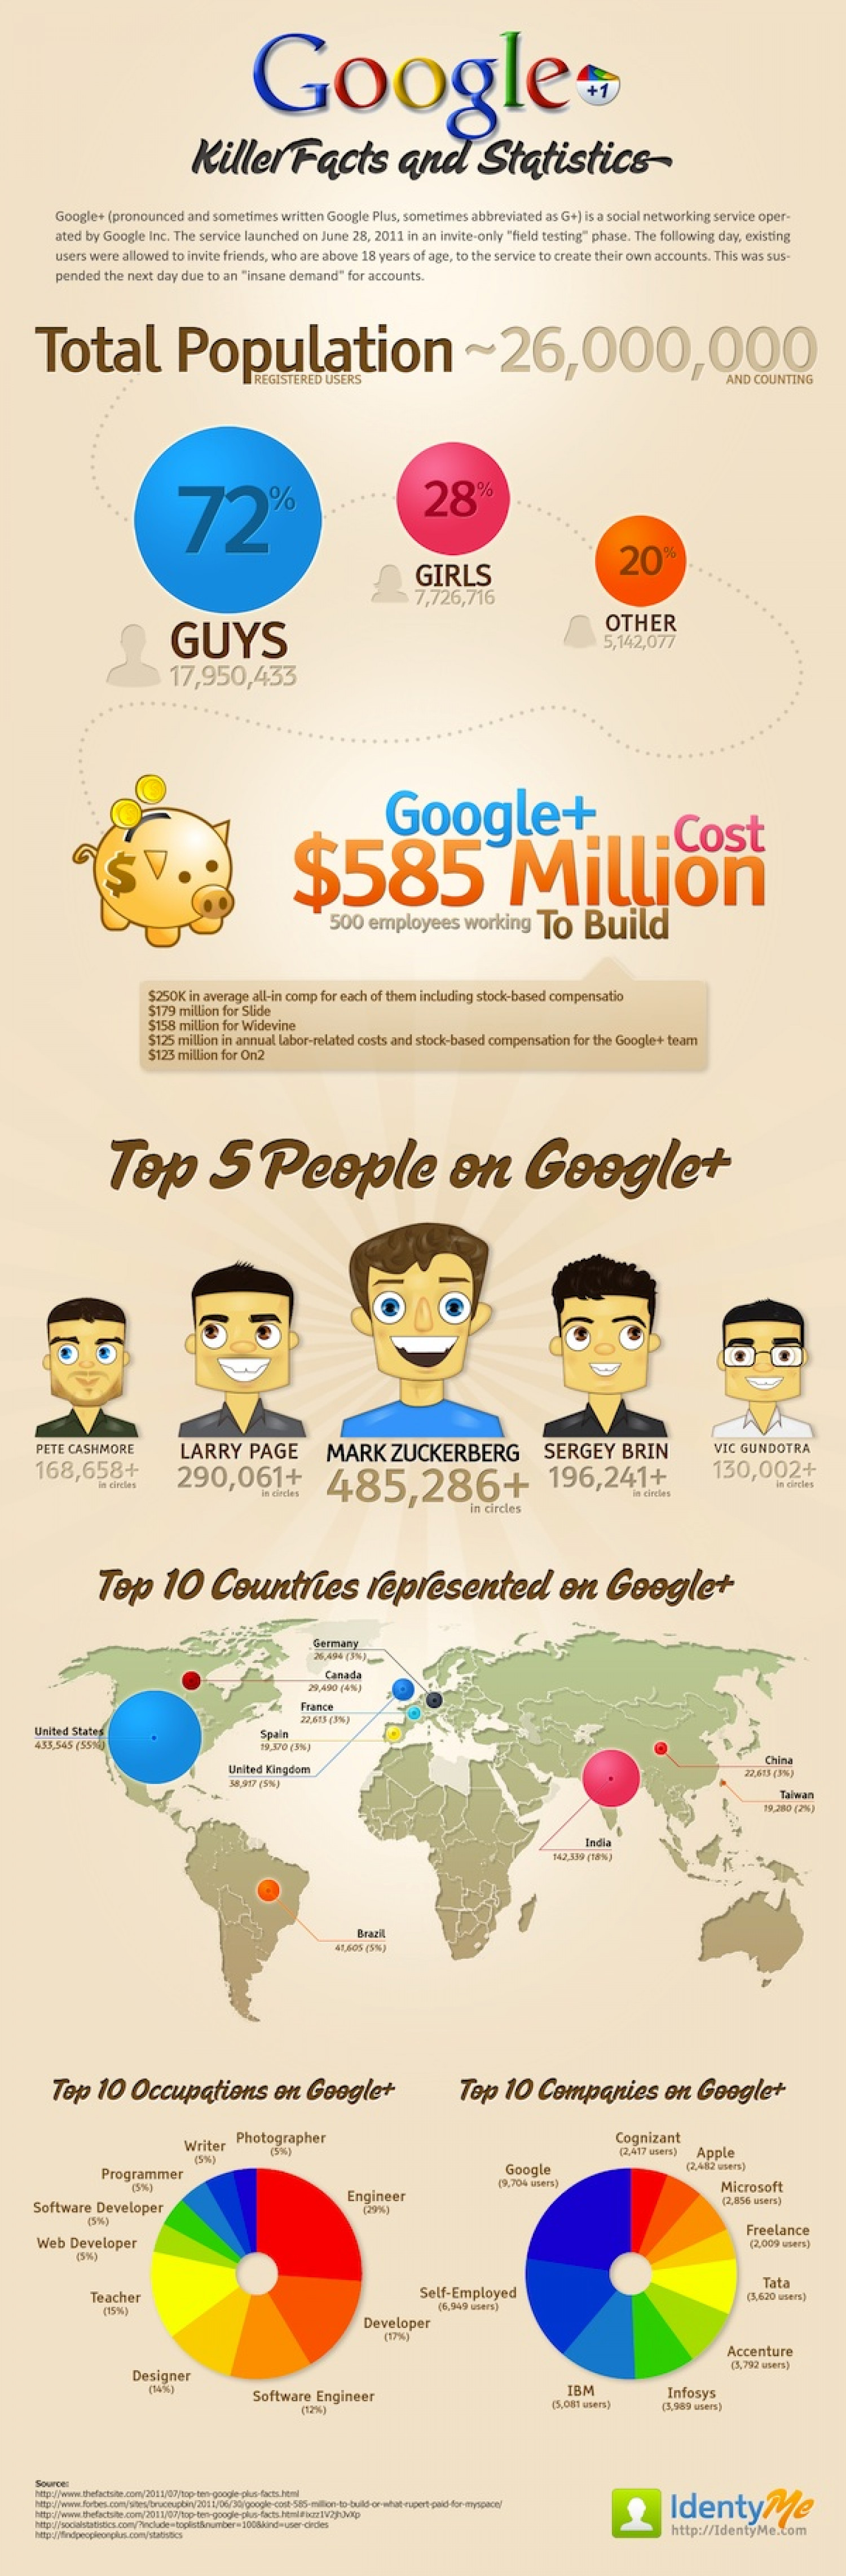 Google+ Killer Facts and Statistics  Infographic